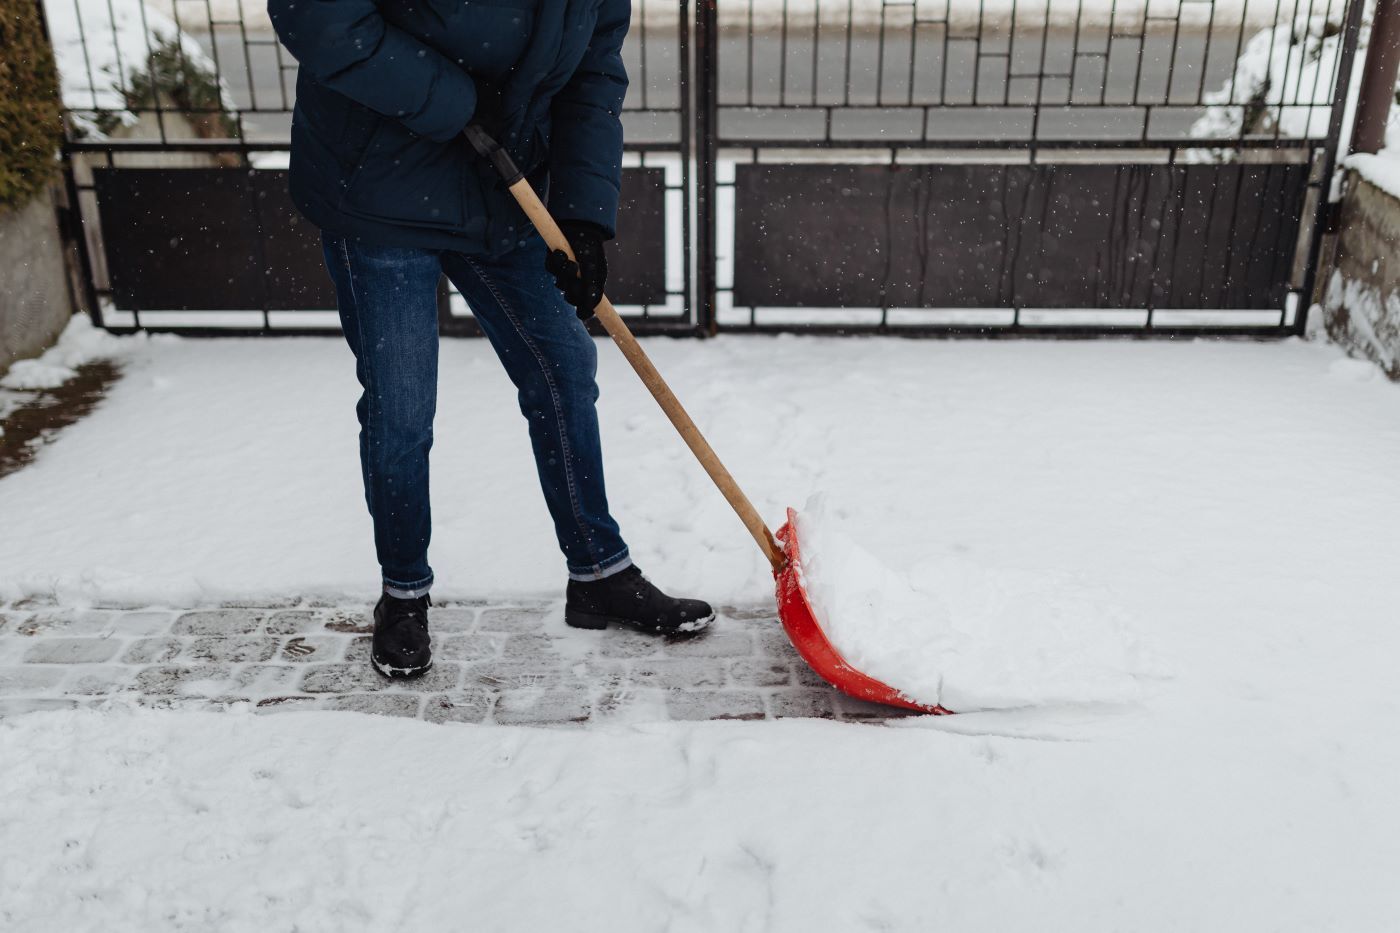 An image of a person using an electric snow blower